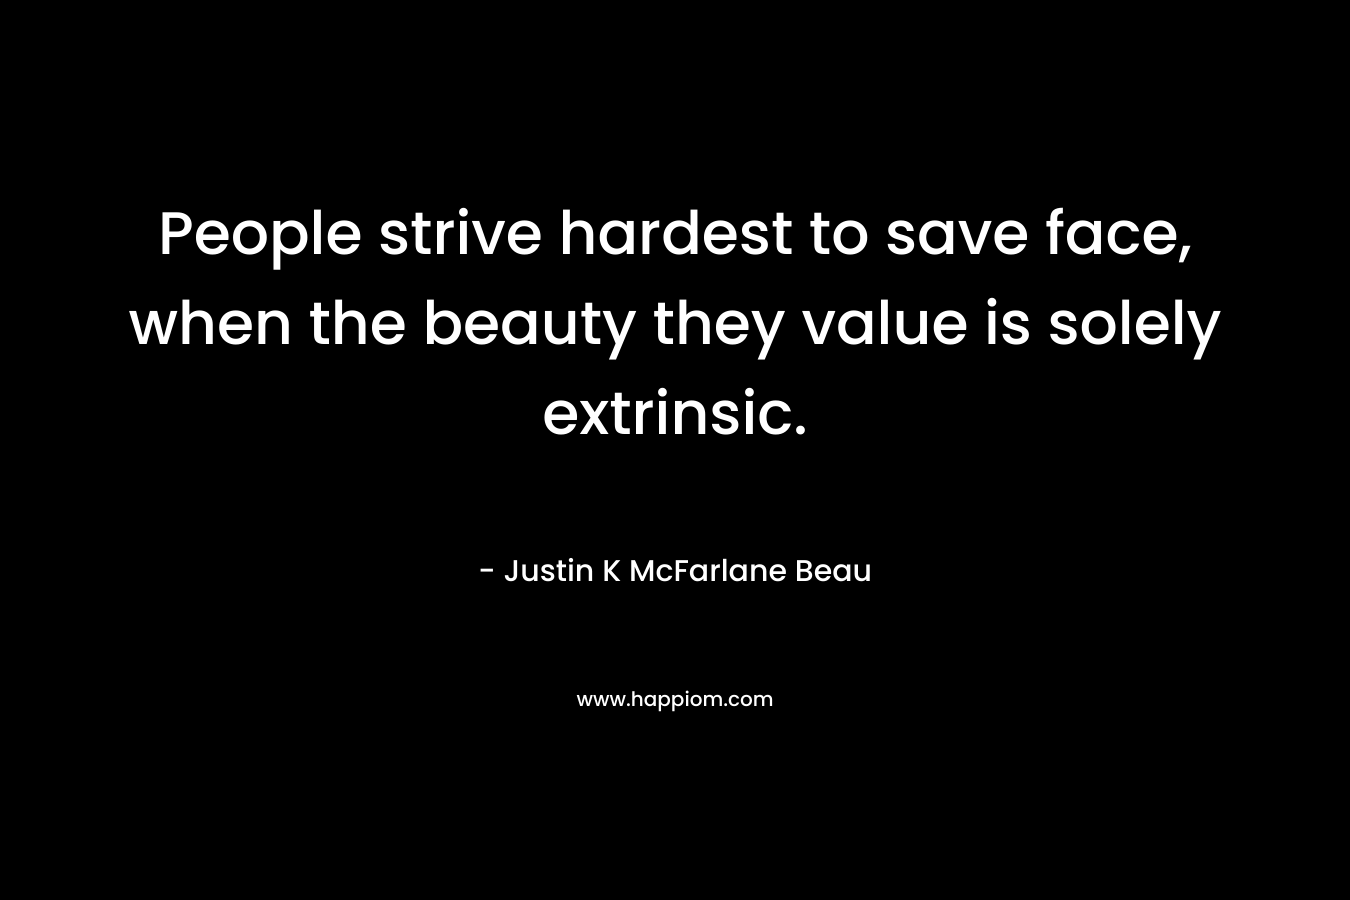 People strive hardest to save face, when the beauty they value is solely extrinsic.